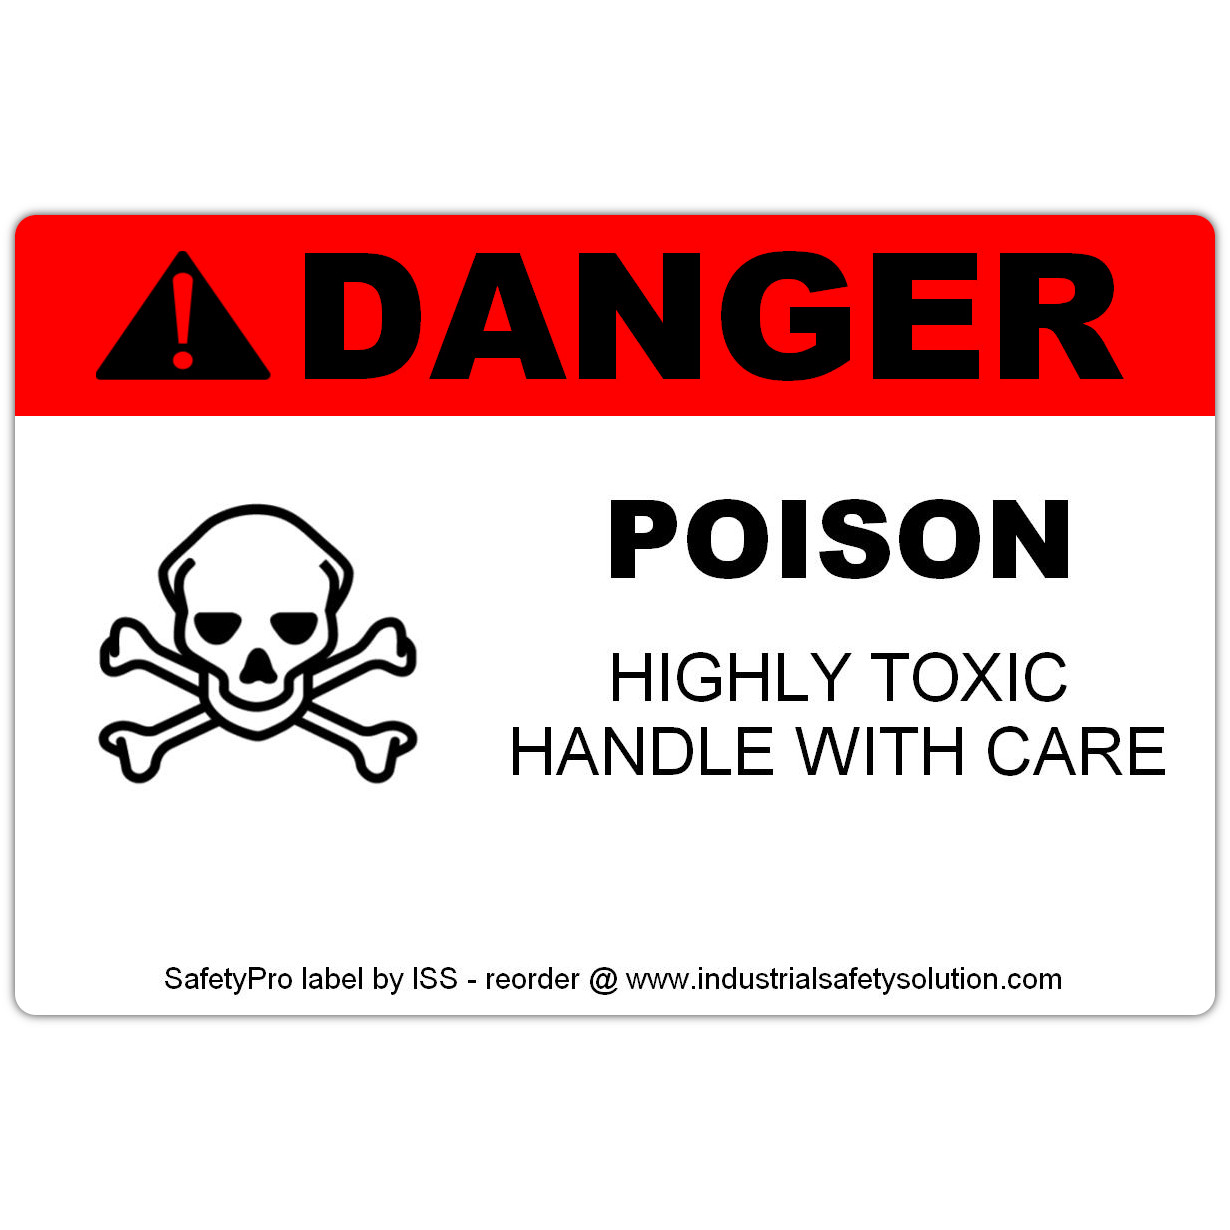 Detail view for 4" x 6" DANGER Poison Safety Label